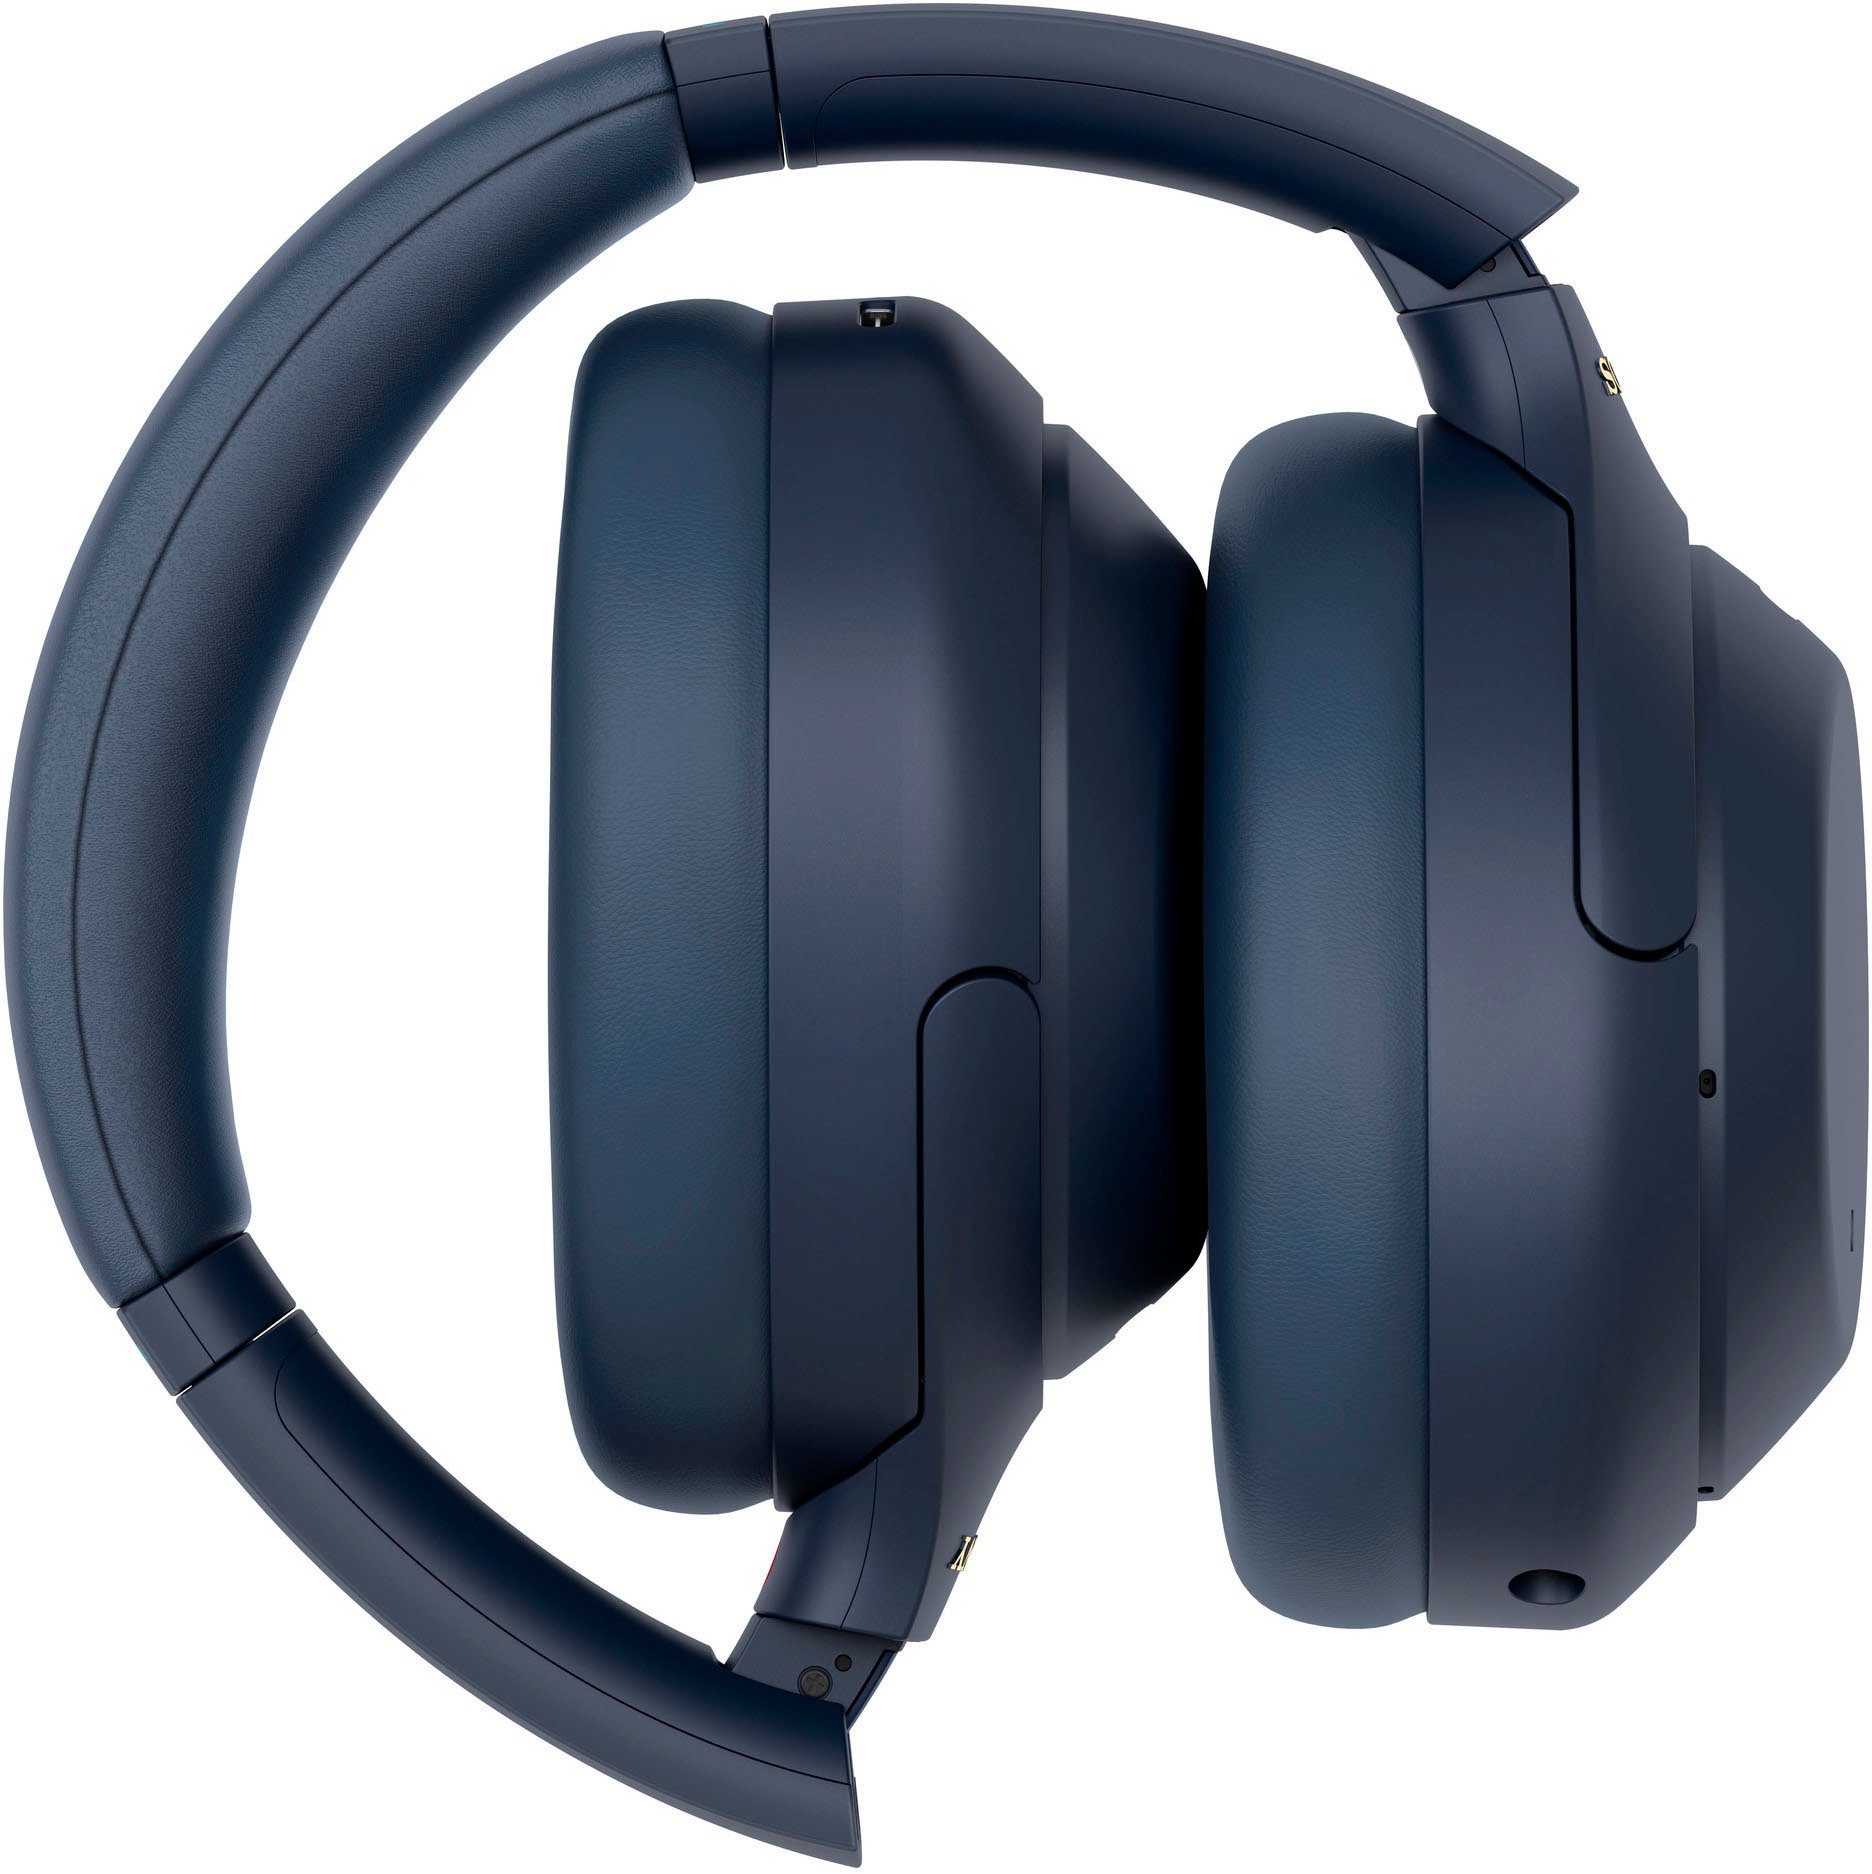 (Noise-Cancelling, blau Touch NFC, Sensor, One-Touch Sony WH-1000XM4 kabelloser via Over-Ear-Kopfhörer Verbindung NFC, Bluetooth, Schnellladefunktion)